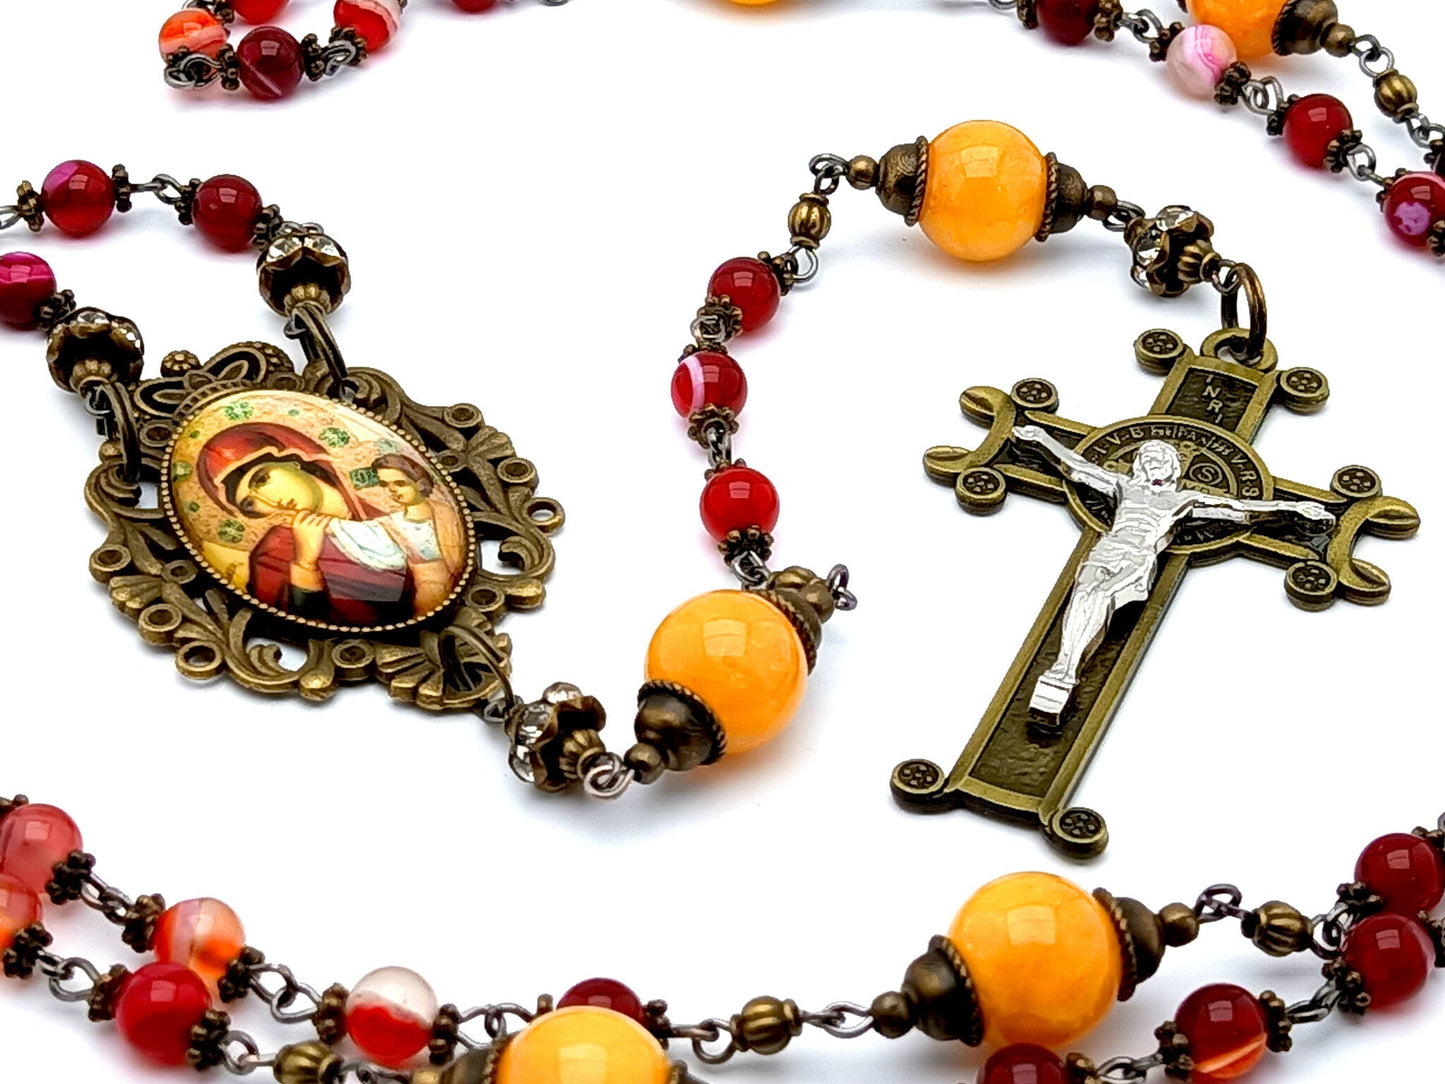 Our Lady of Perpetual Help unique rosary beads agate and jade vintage style gemstone vintage style rosary beads with bronze Saint Benedict crucifix.